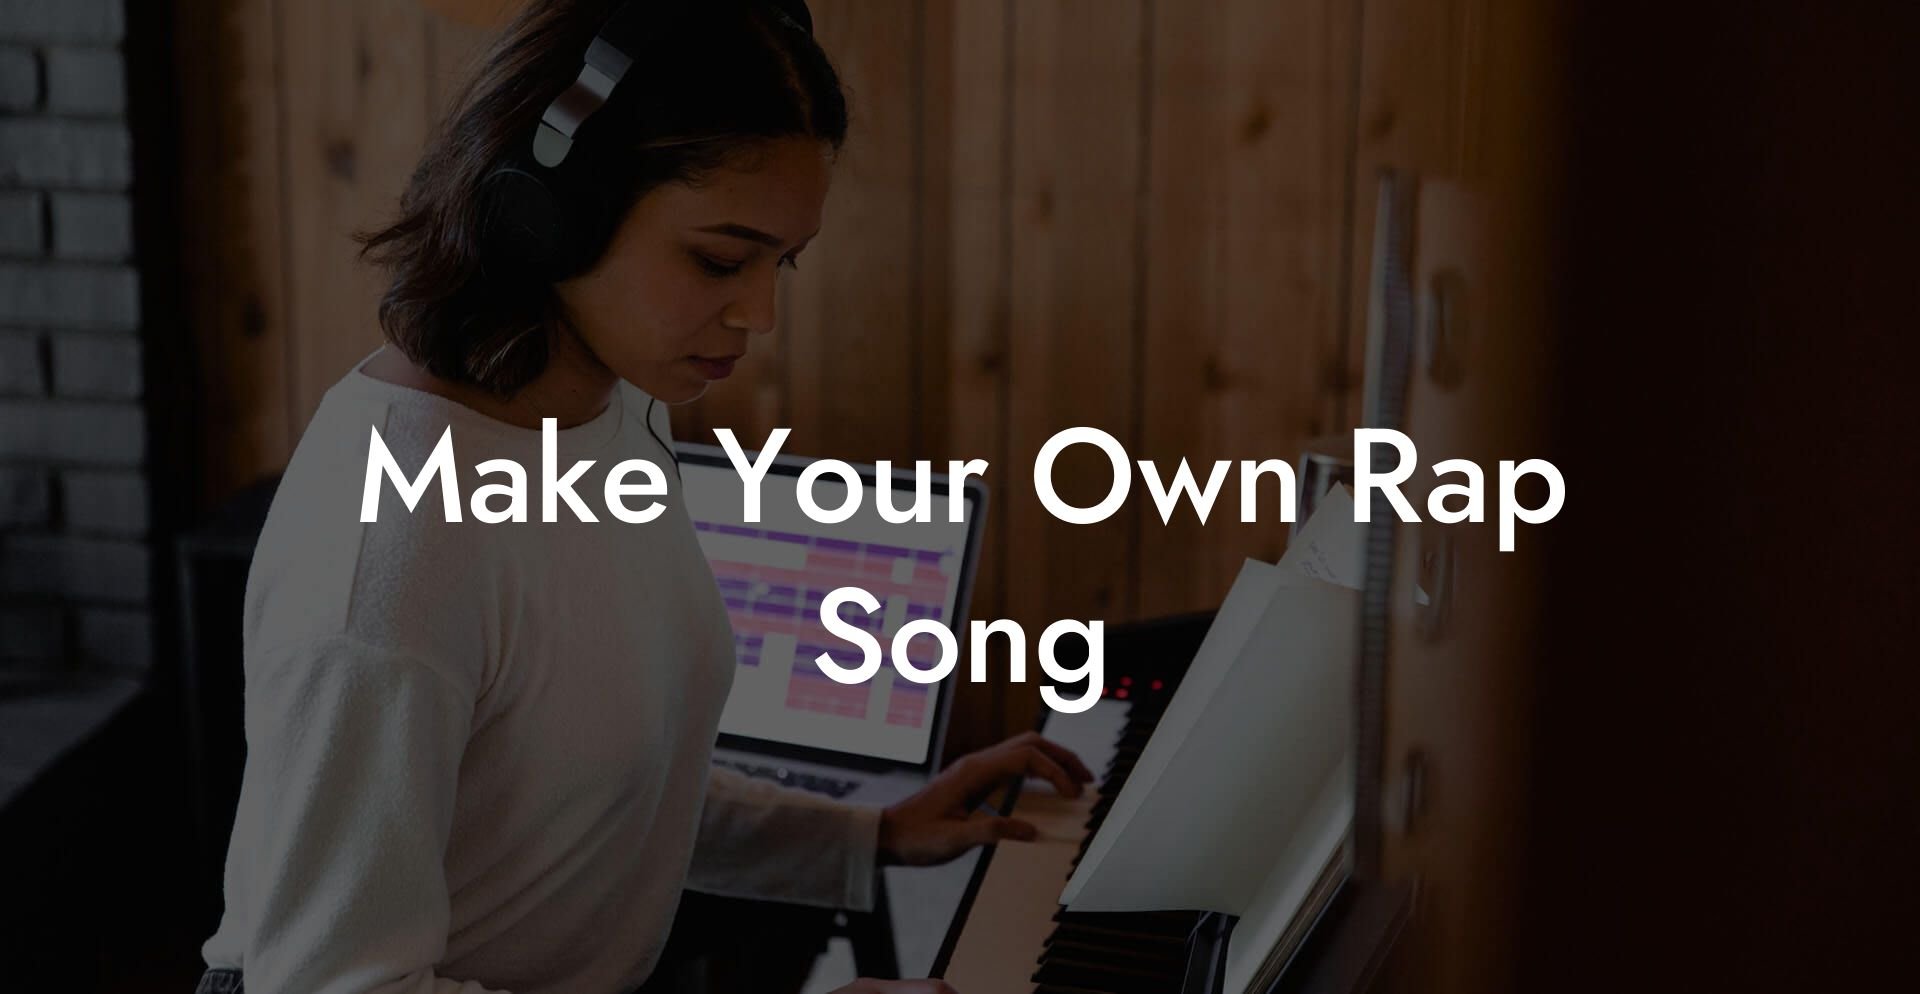 make your own rap song lyric assistant